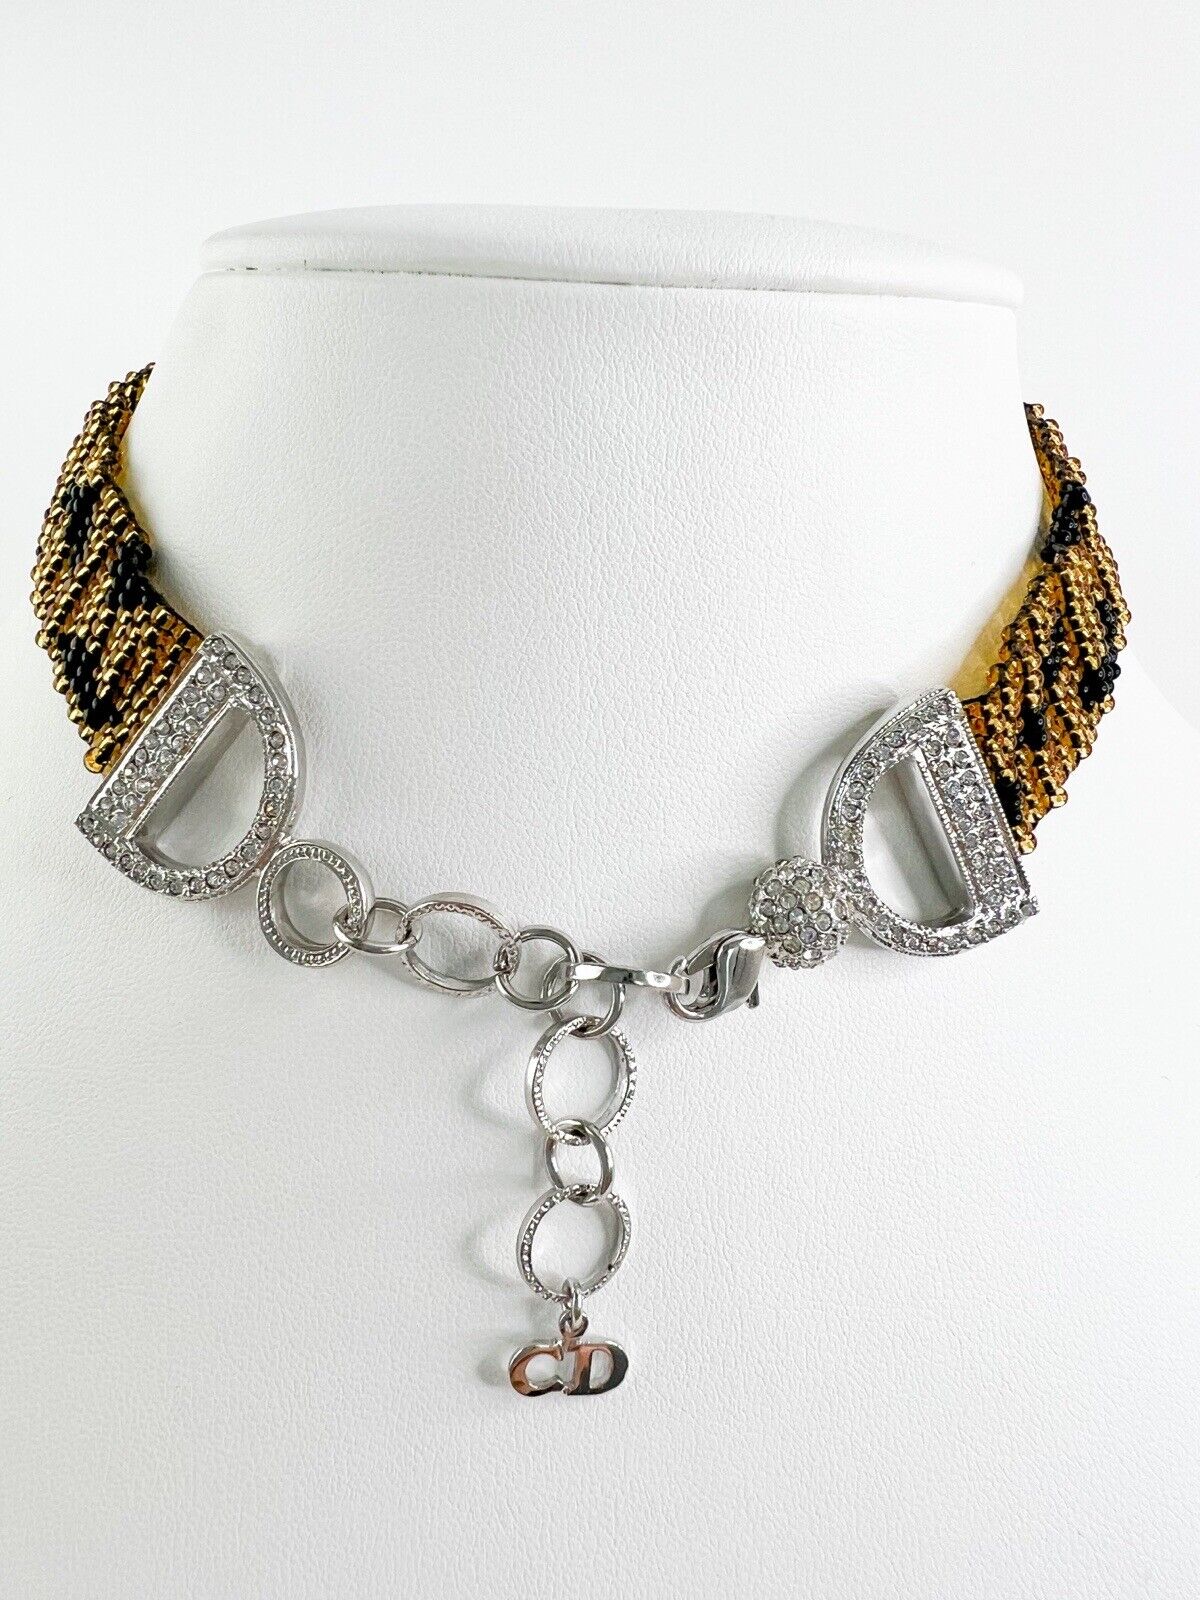 Vintage Christian Dior choker Necklace, Animal Leopard Necklace, Dior Necklace John Galliano, Gold Tone Necklace, Glass beads Necklace